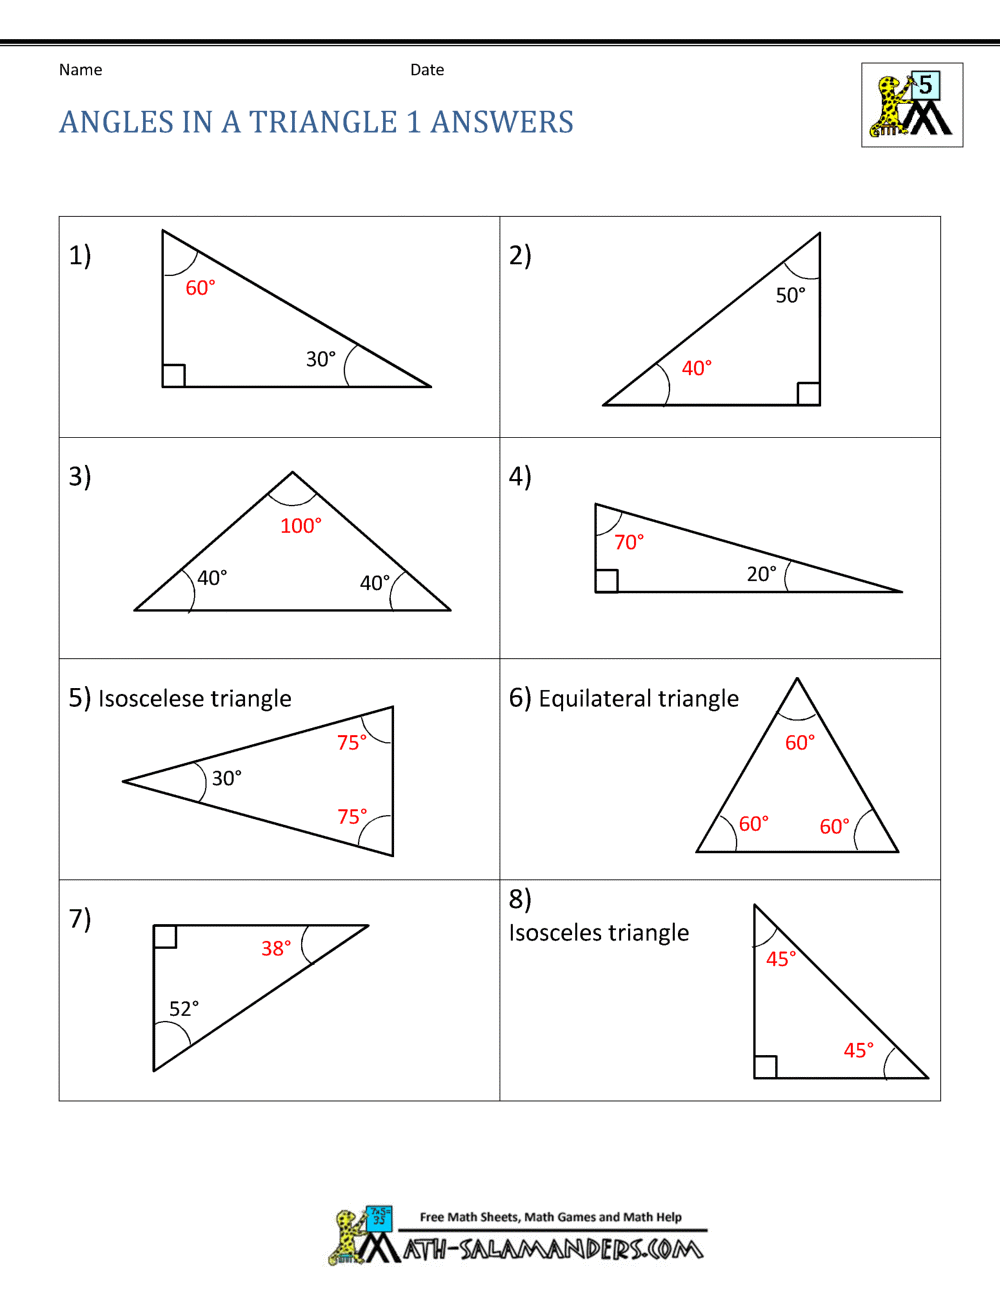 11th Grade Geometry Intended For Angles In A Triangle Worksheet